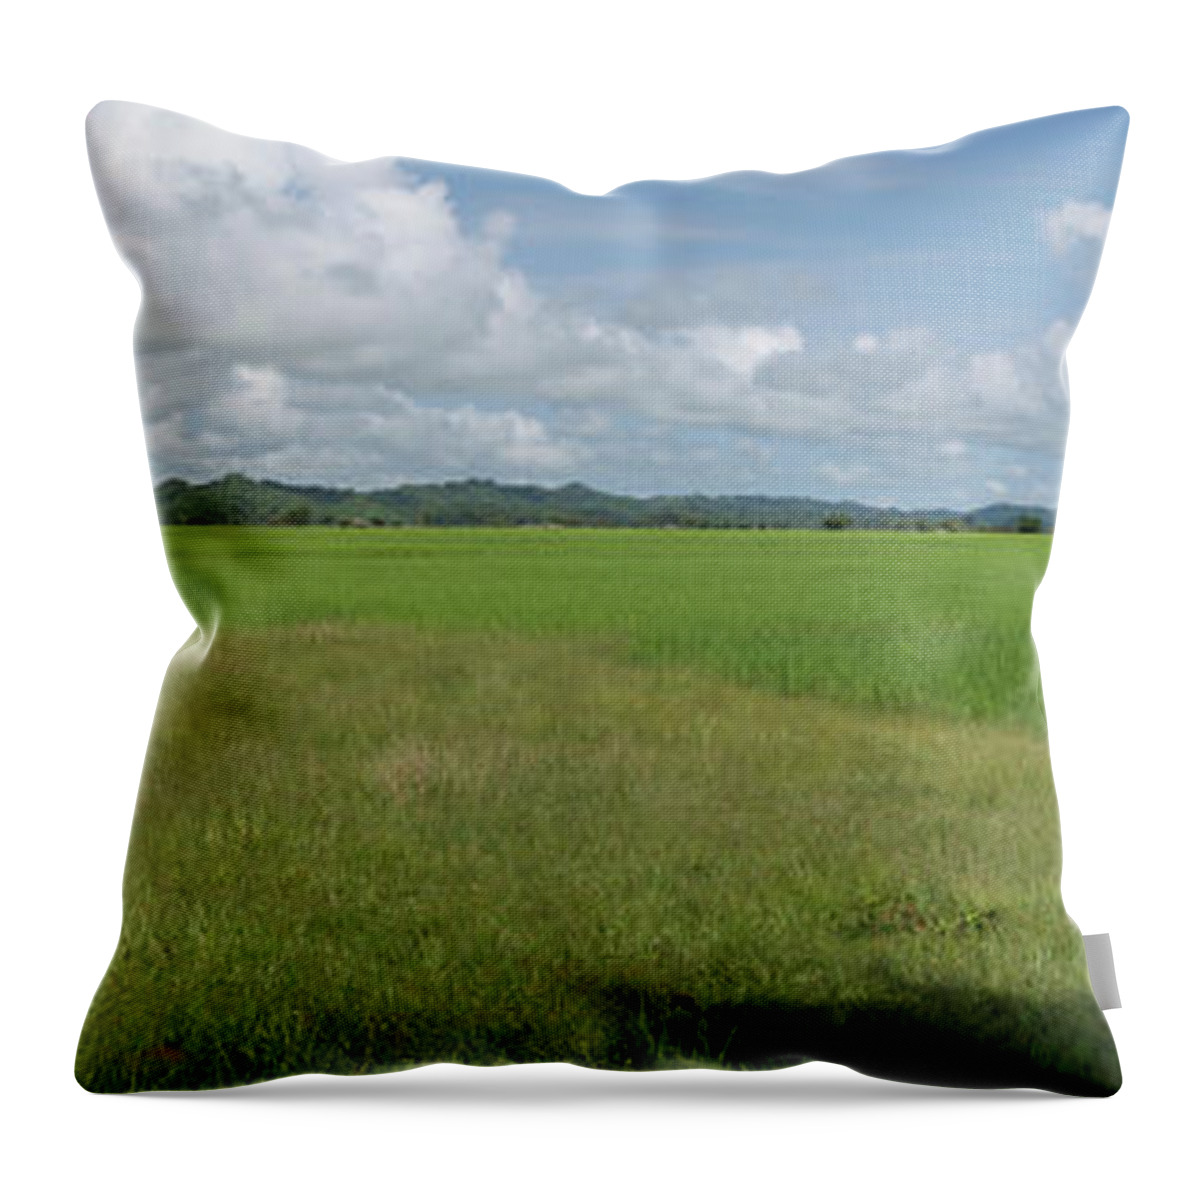 Photography Throw Pillow featuring the photograph Agricultural Field Near Mrauk U by Panoramic Images